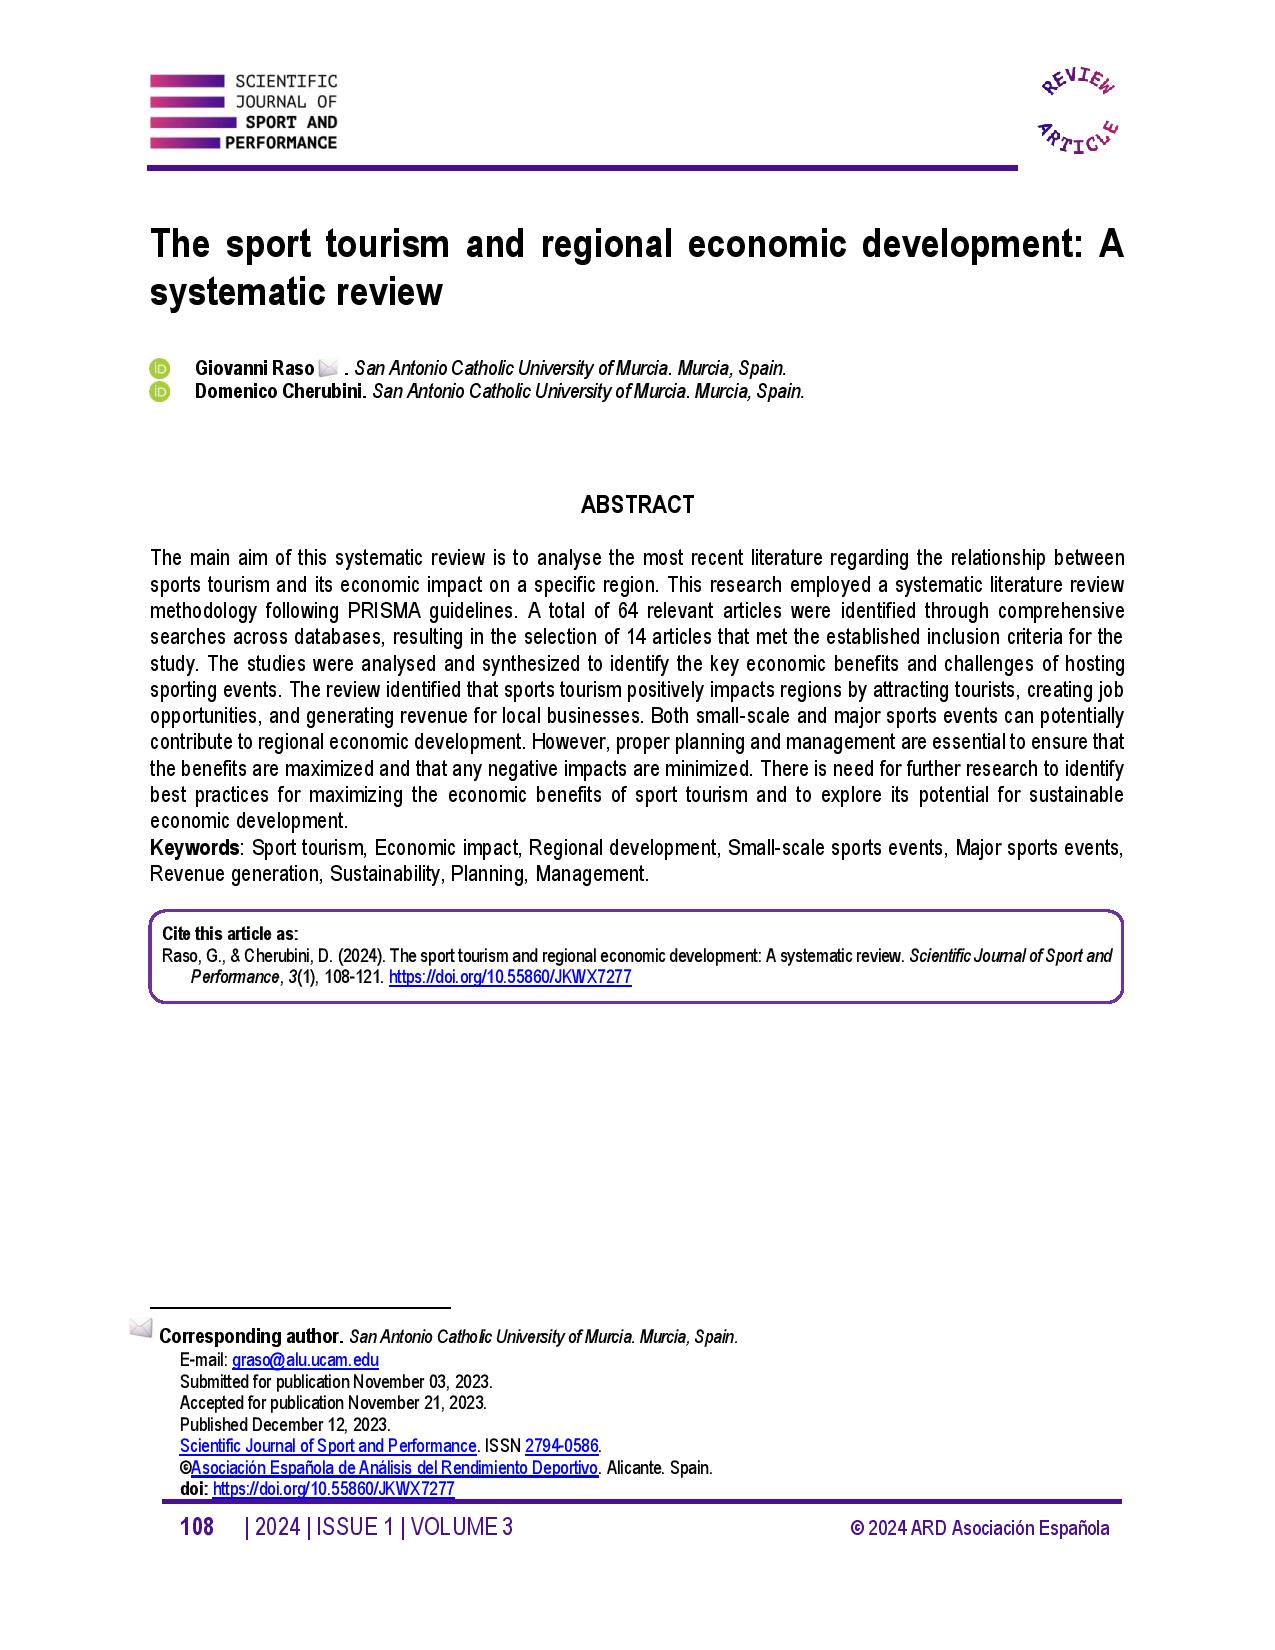 The sport tourism and regional economic development: A systematic review